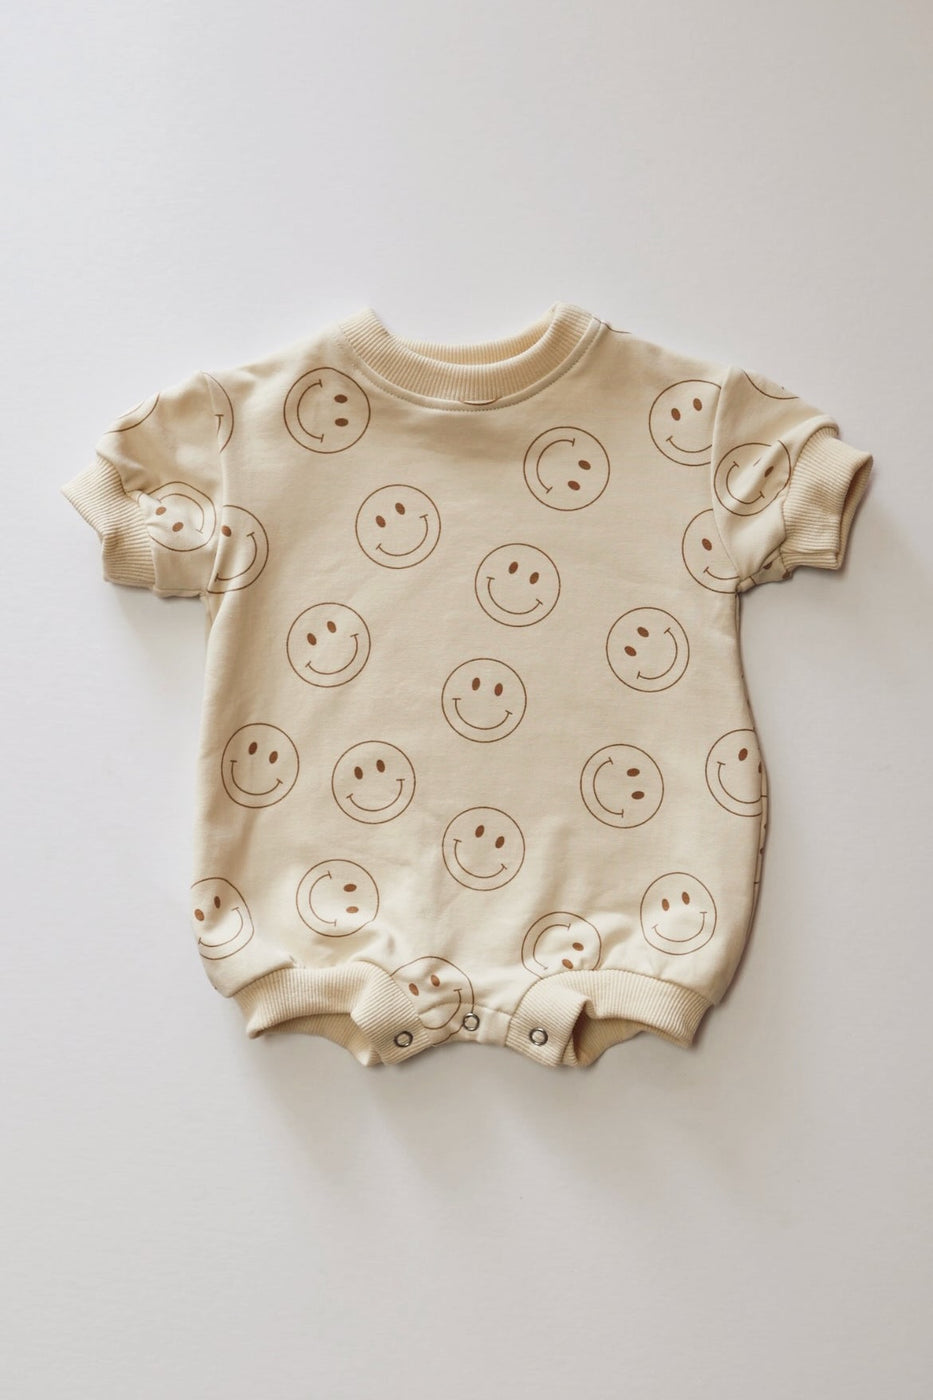 a baby clothes with smiley faces on it